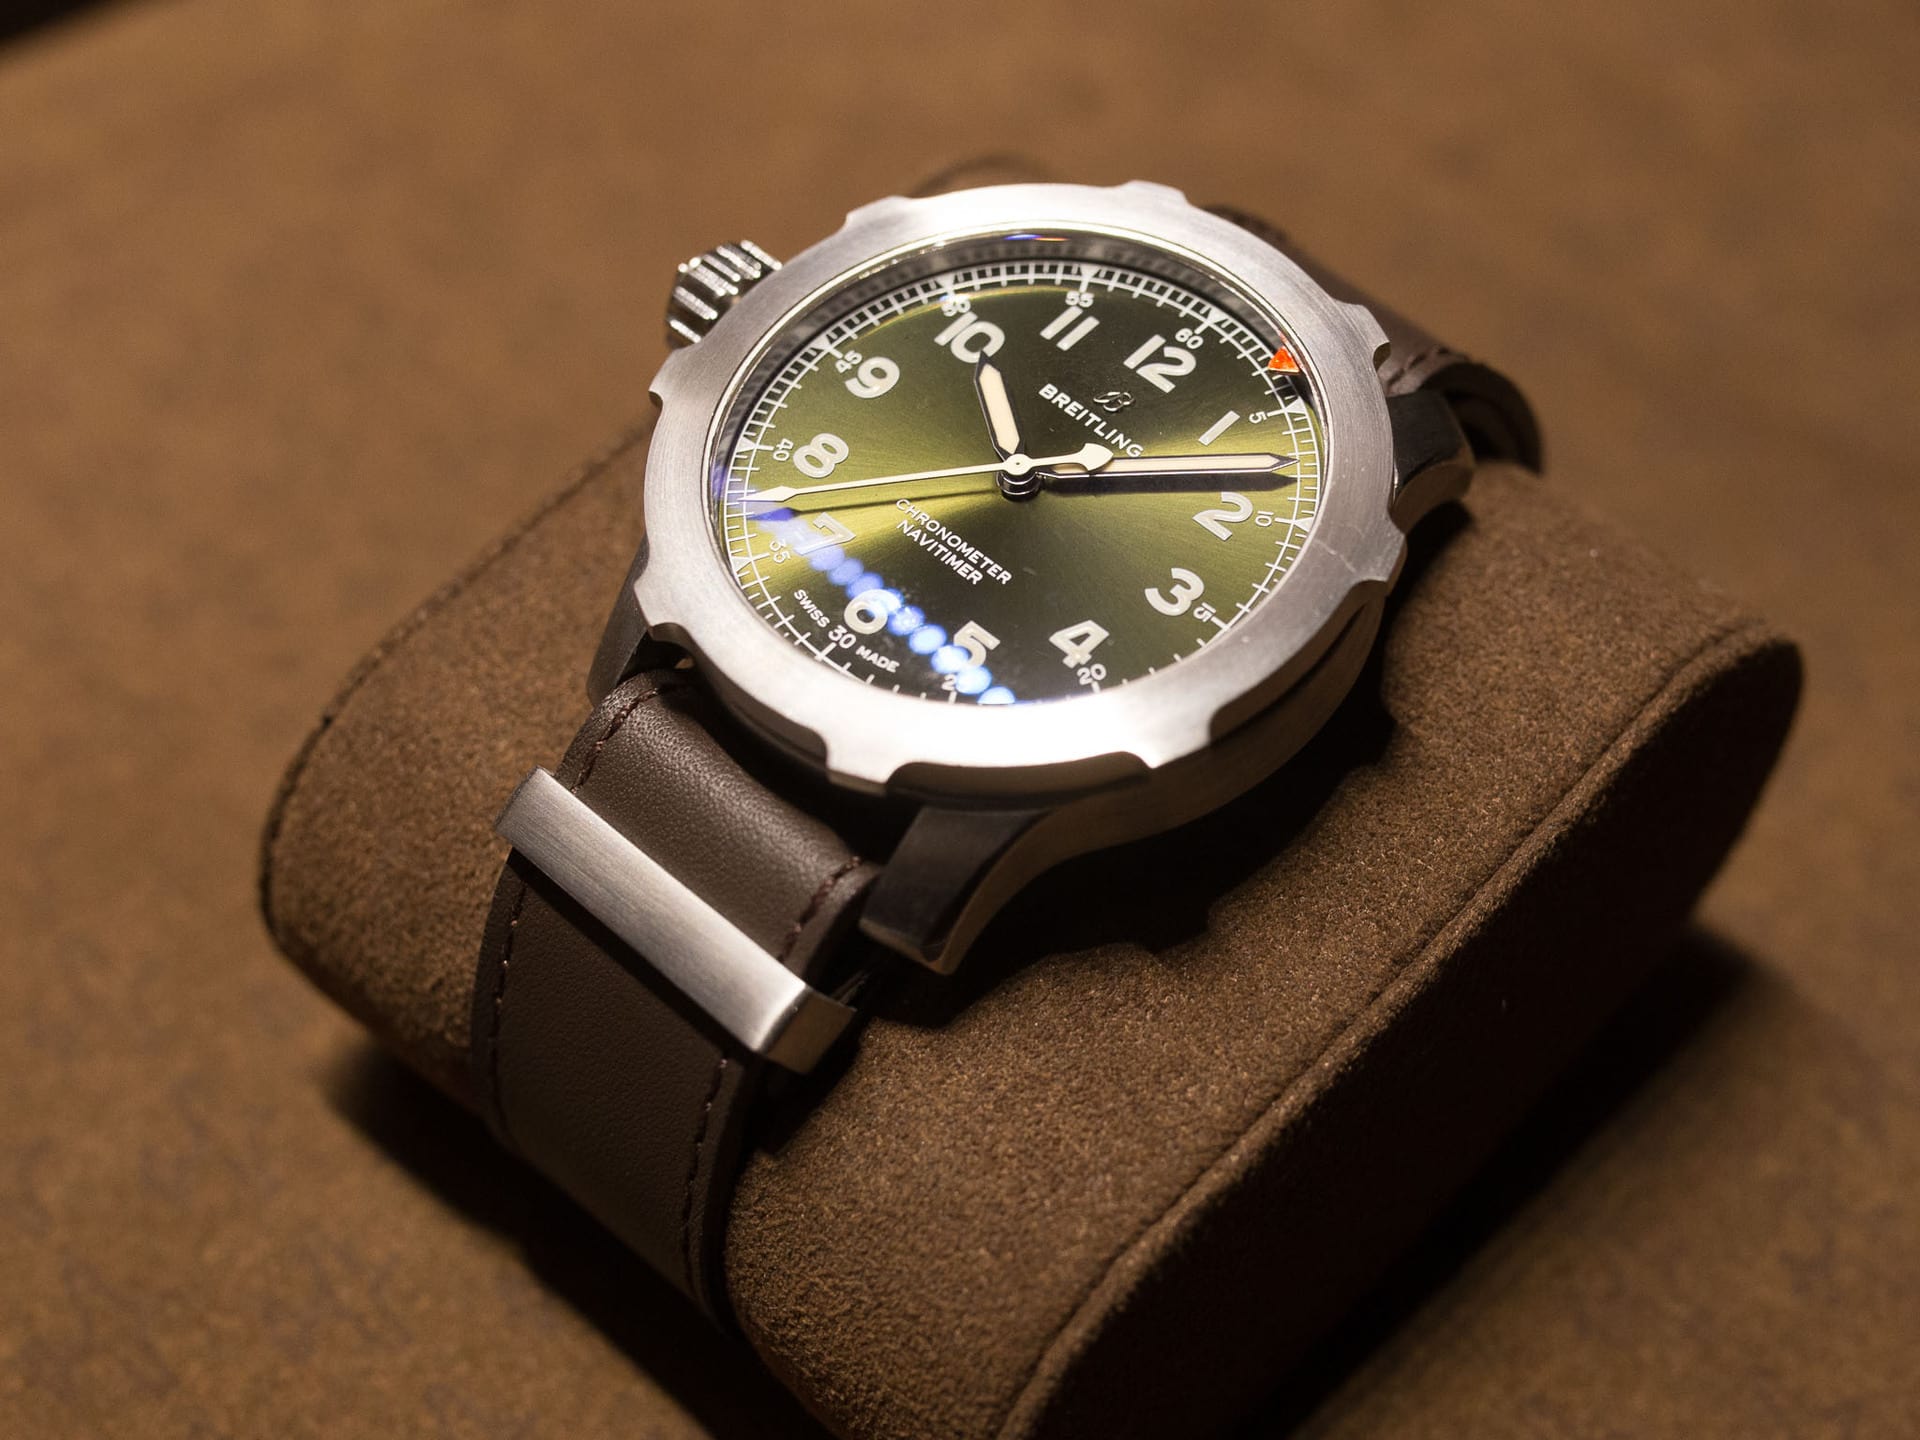 The army green dials fake watches are designed for men.